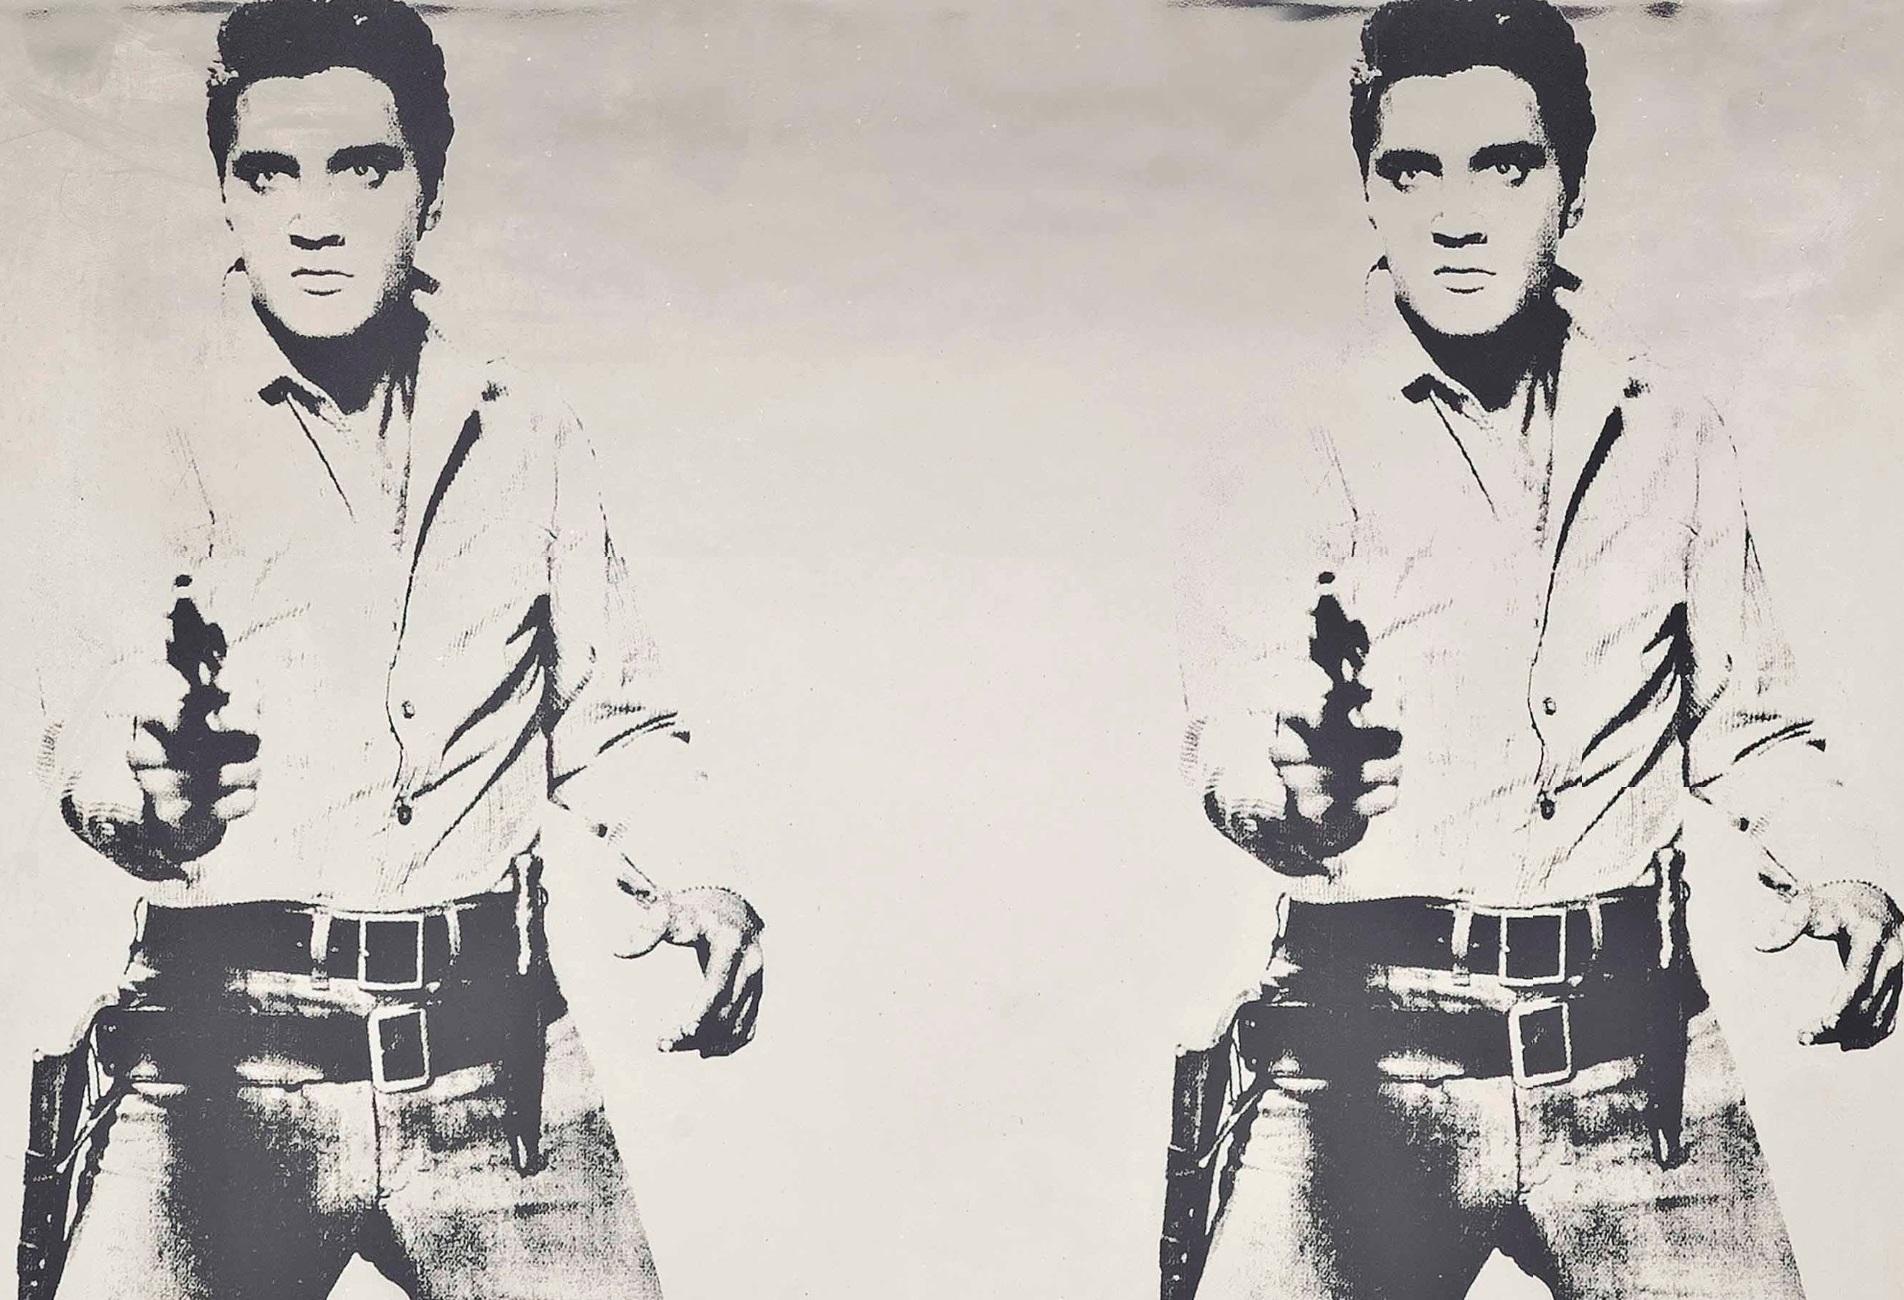 Andy Warhol
Platinum Elvis
2007
A Rosenthal transfer-printed plaque in colours
51 × 51 cm (20.1 × 20.1 in)
Published by Rosenthal studio-line, in collaboration with The Andy Warhol Foundation for the visual Arts INC., New York. 
Edition of 49
In